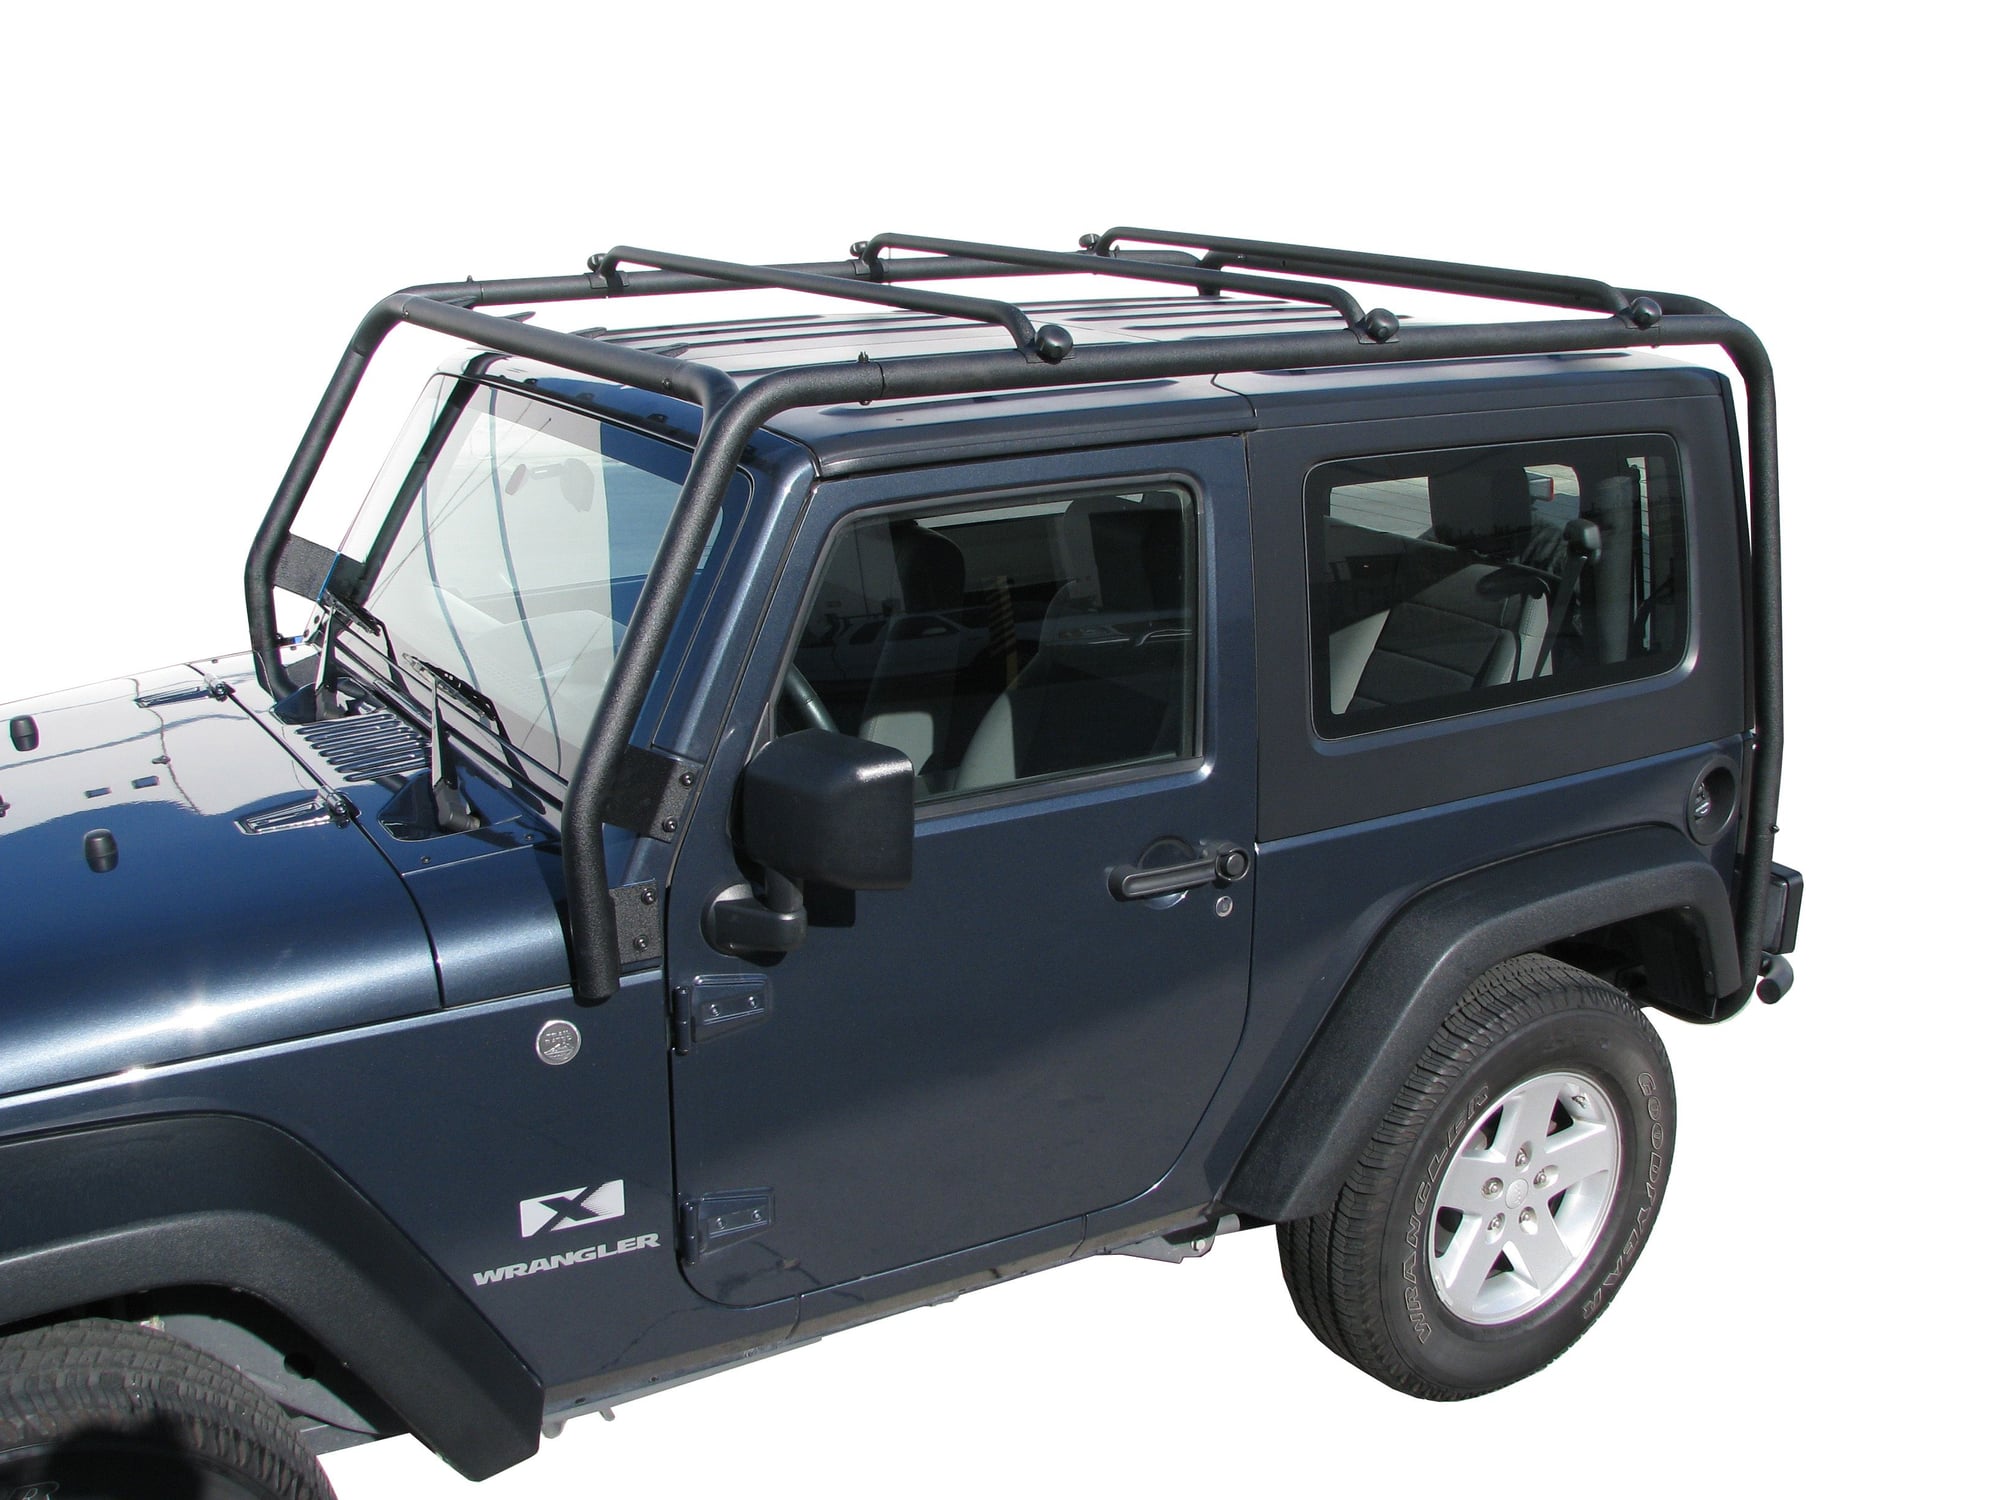 Accessories - TrailFX J021T 2 Door Wrangler Roof Rack - New - 2007 to 2018 Jeep Wrangler - Parker, CO 80134, United States